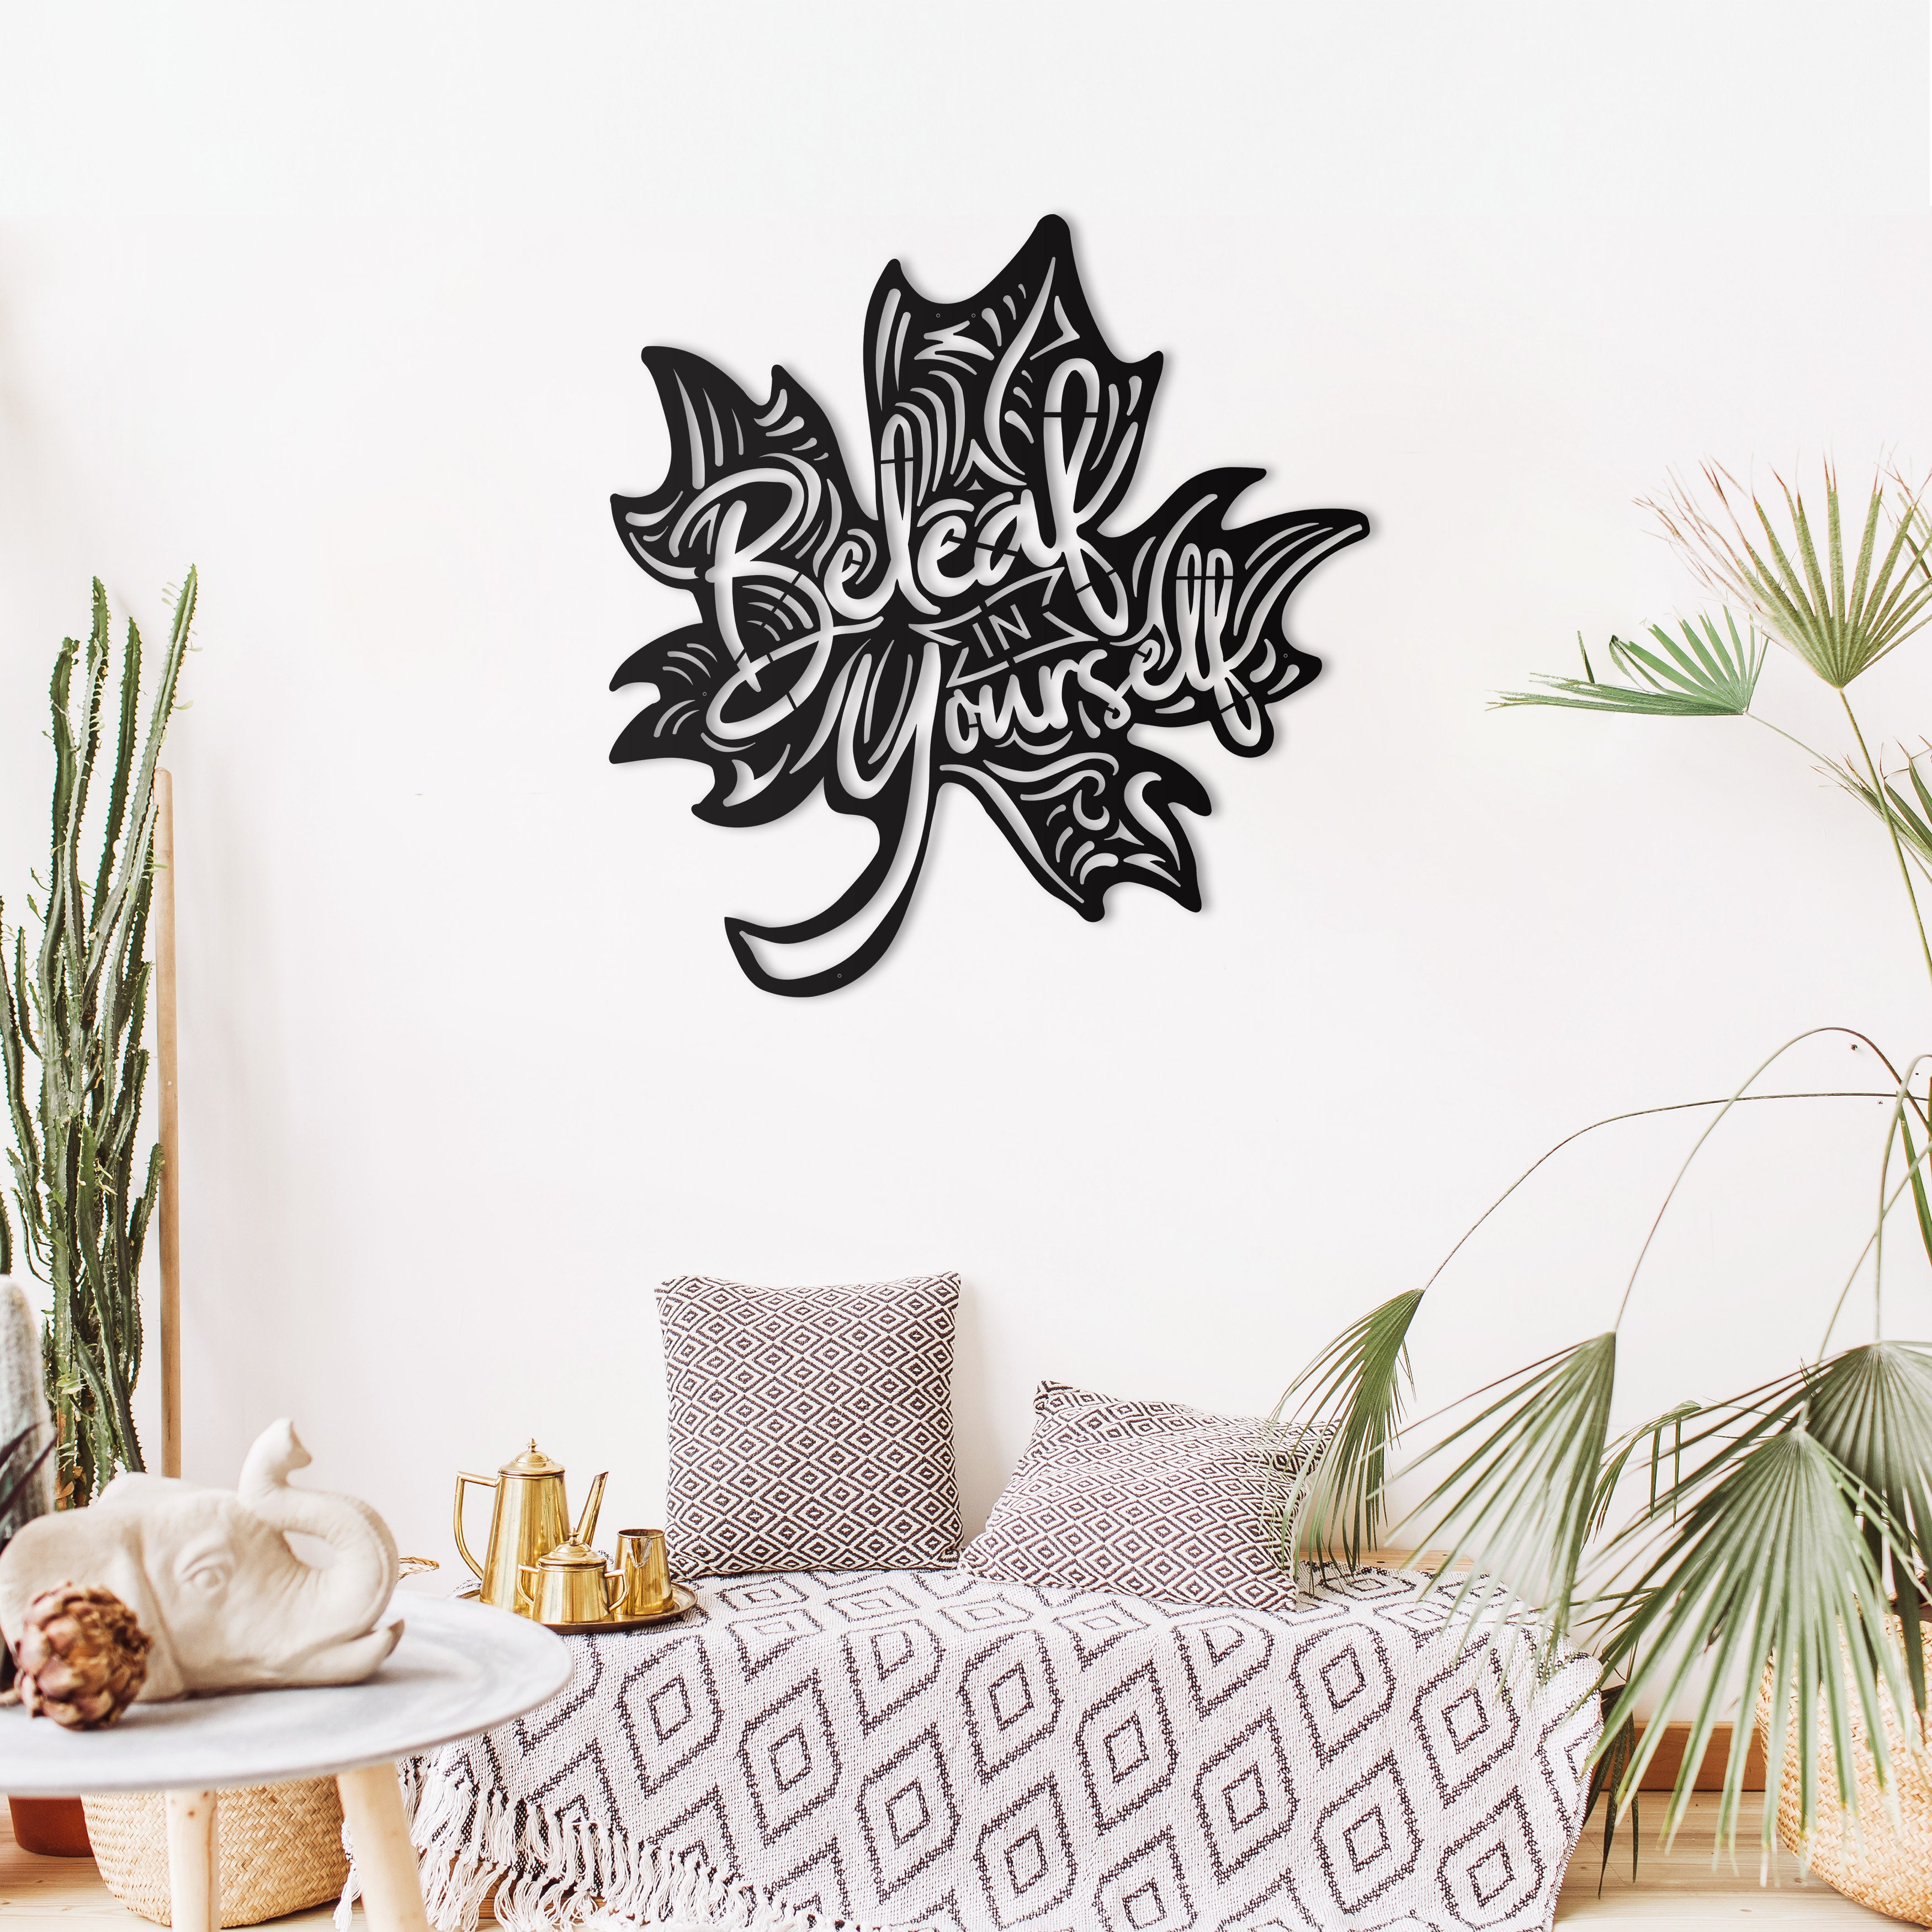 Motivational Leaf Oversize Wall Decor/Living Room Wall Decor Anniversary Gift New Home Gift Wedding Gift